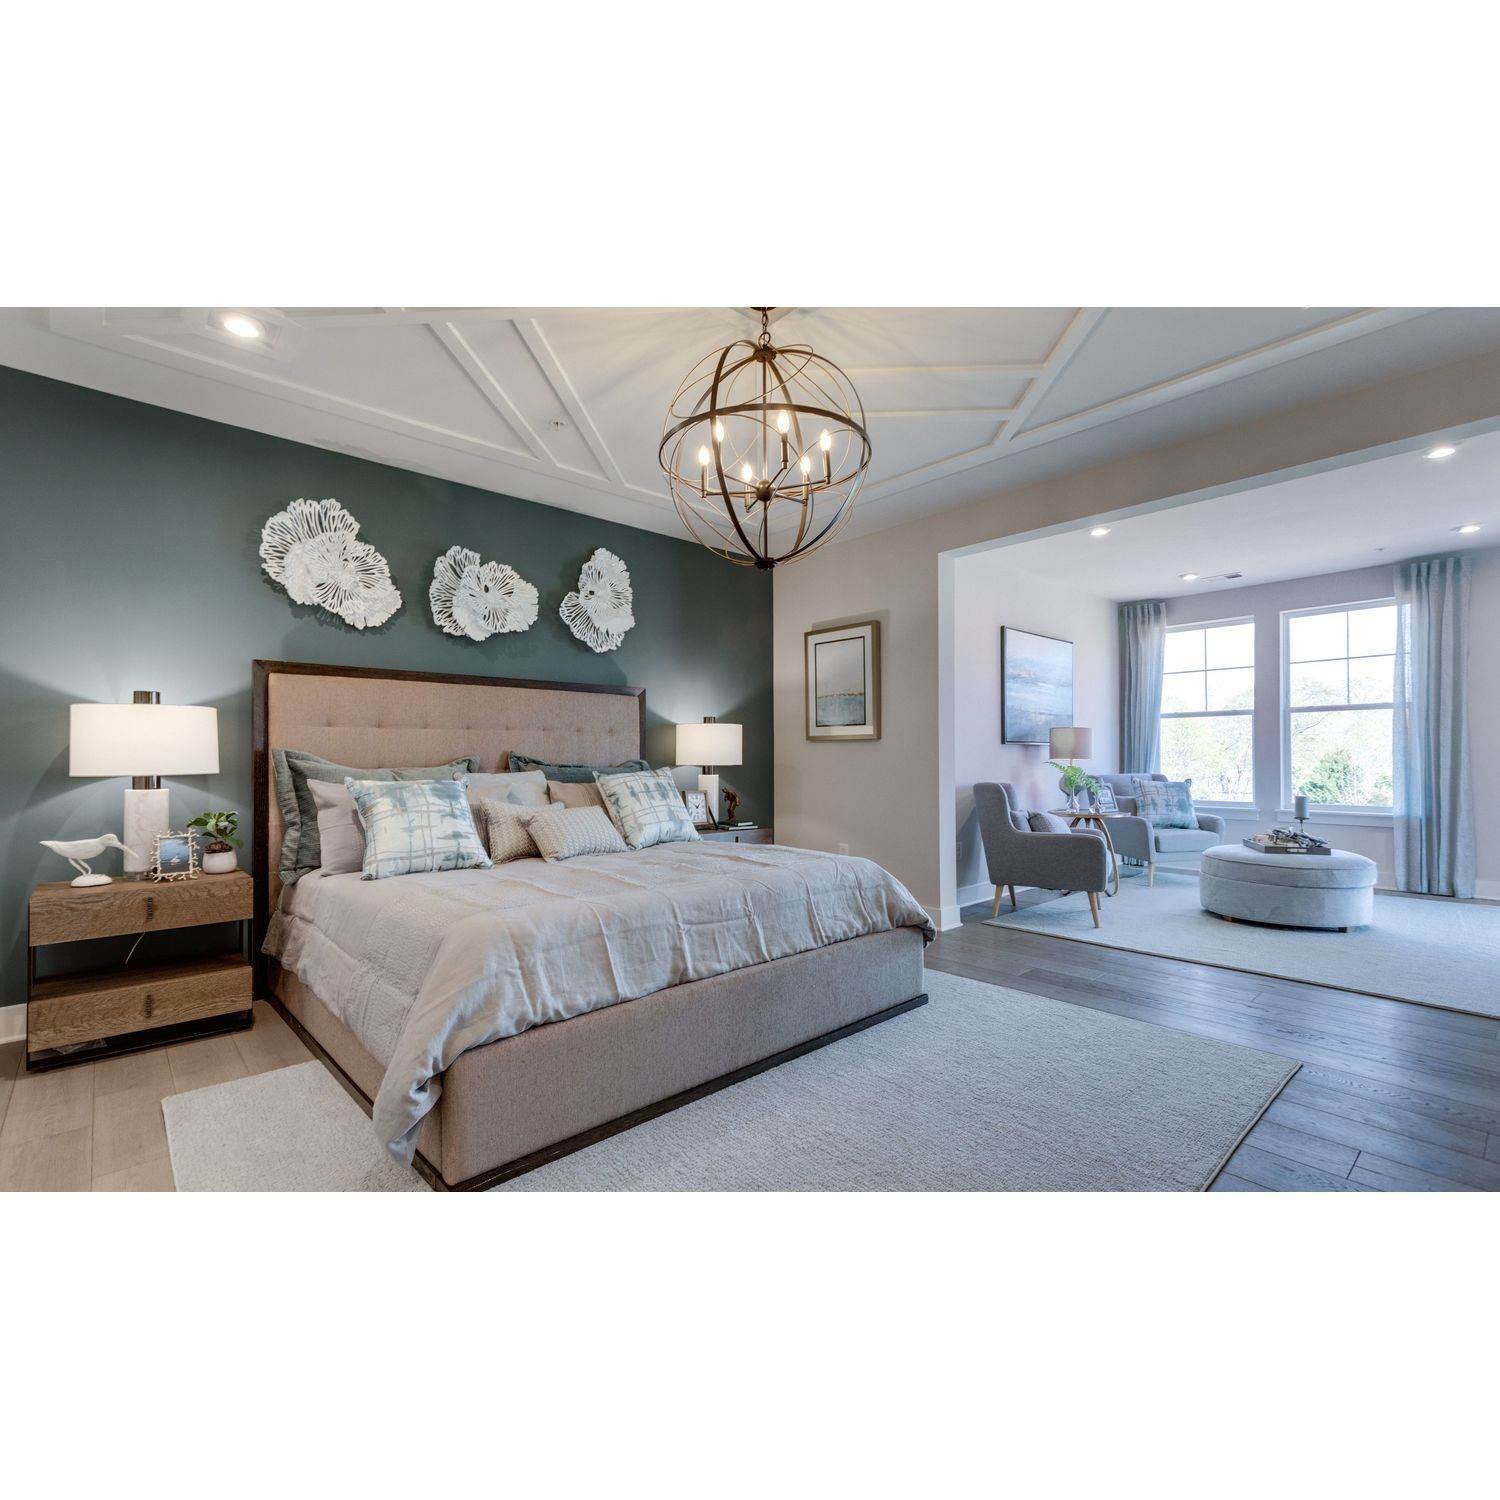 4. K. Hovnanian’s® Four Seasons at Kent Island - Luxury Condos xây dựng tại 131 Flycatcher Way, Chester, MD 21619